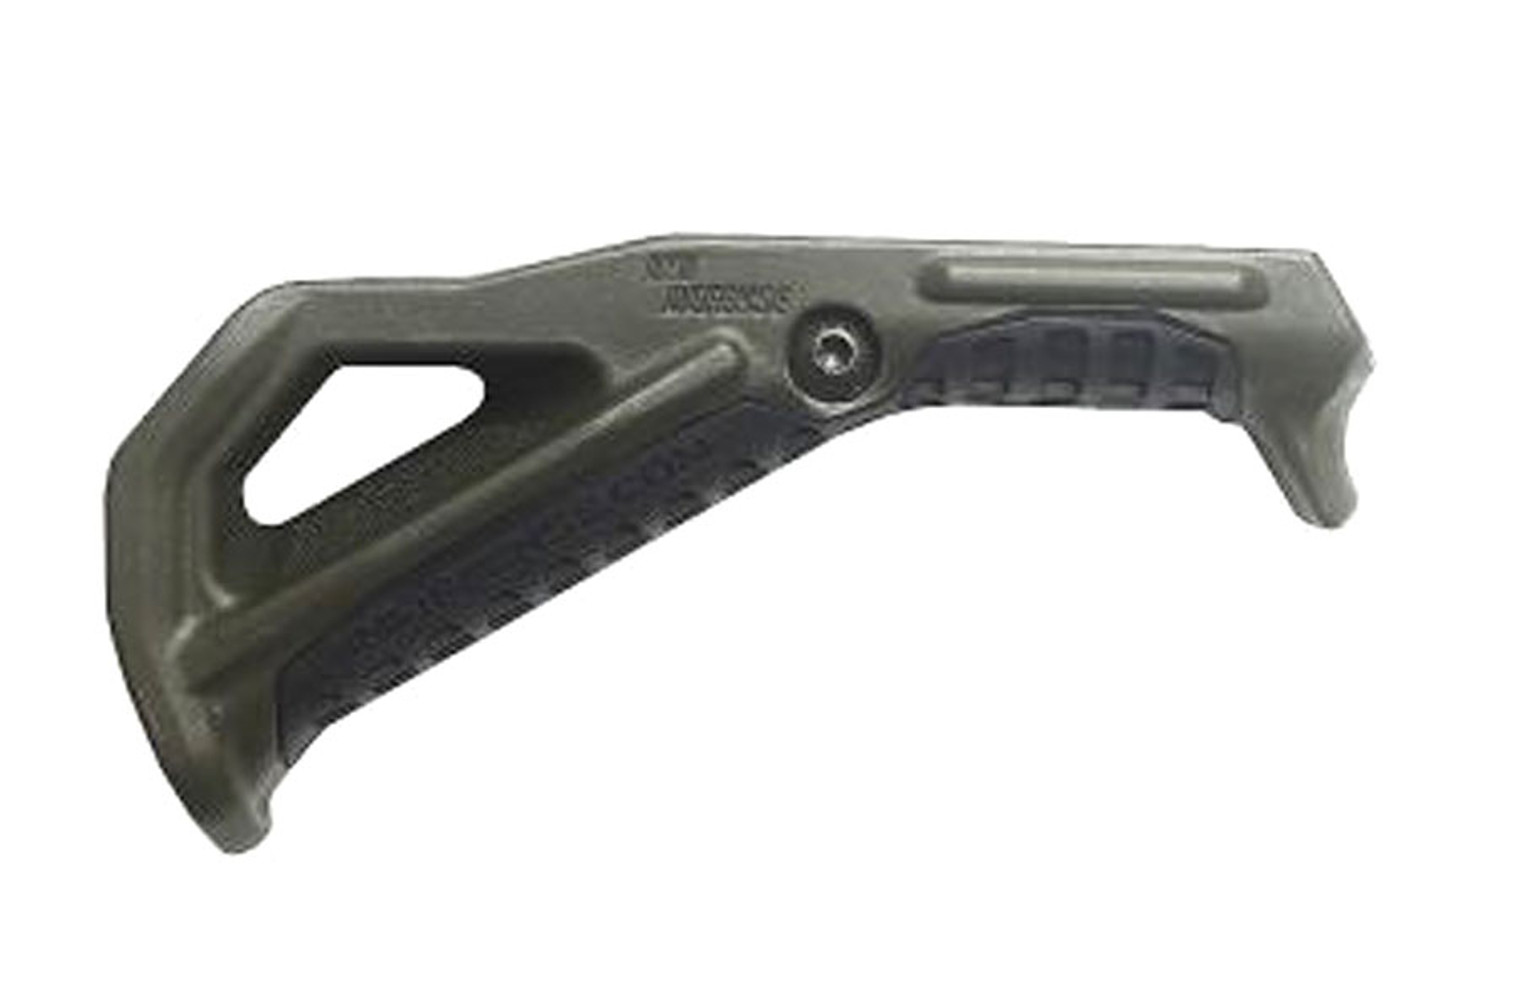 FSG2 Front Support Grip OD Green